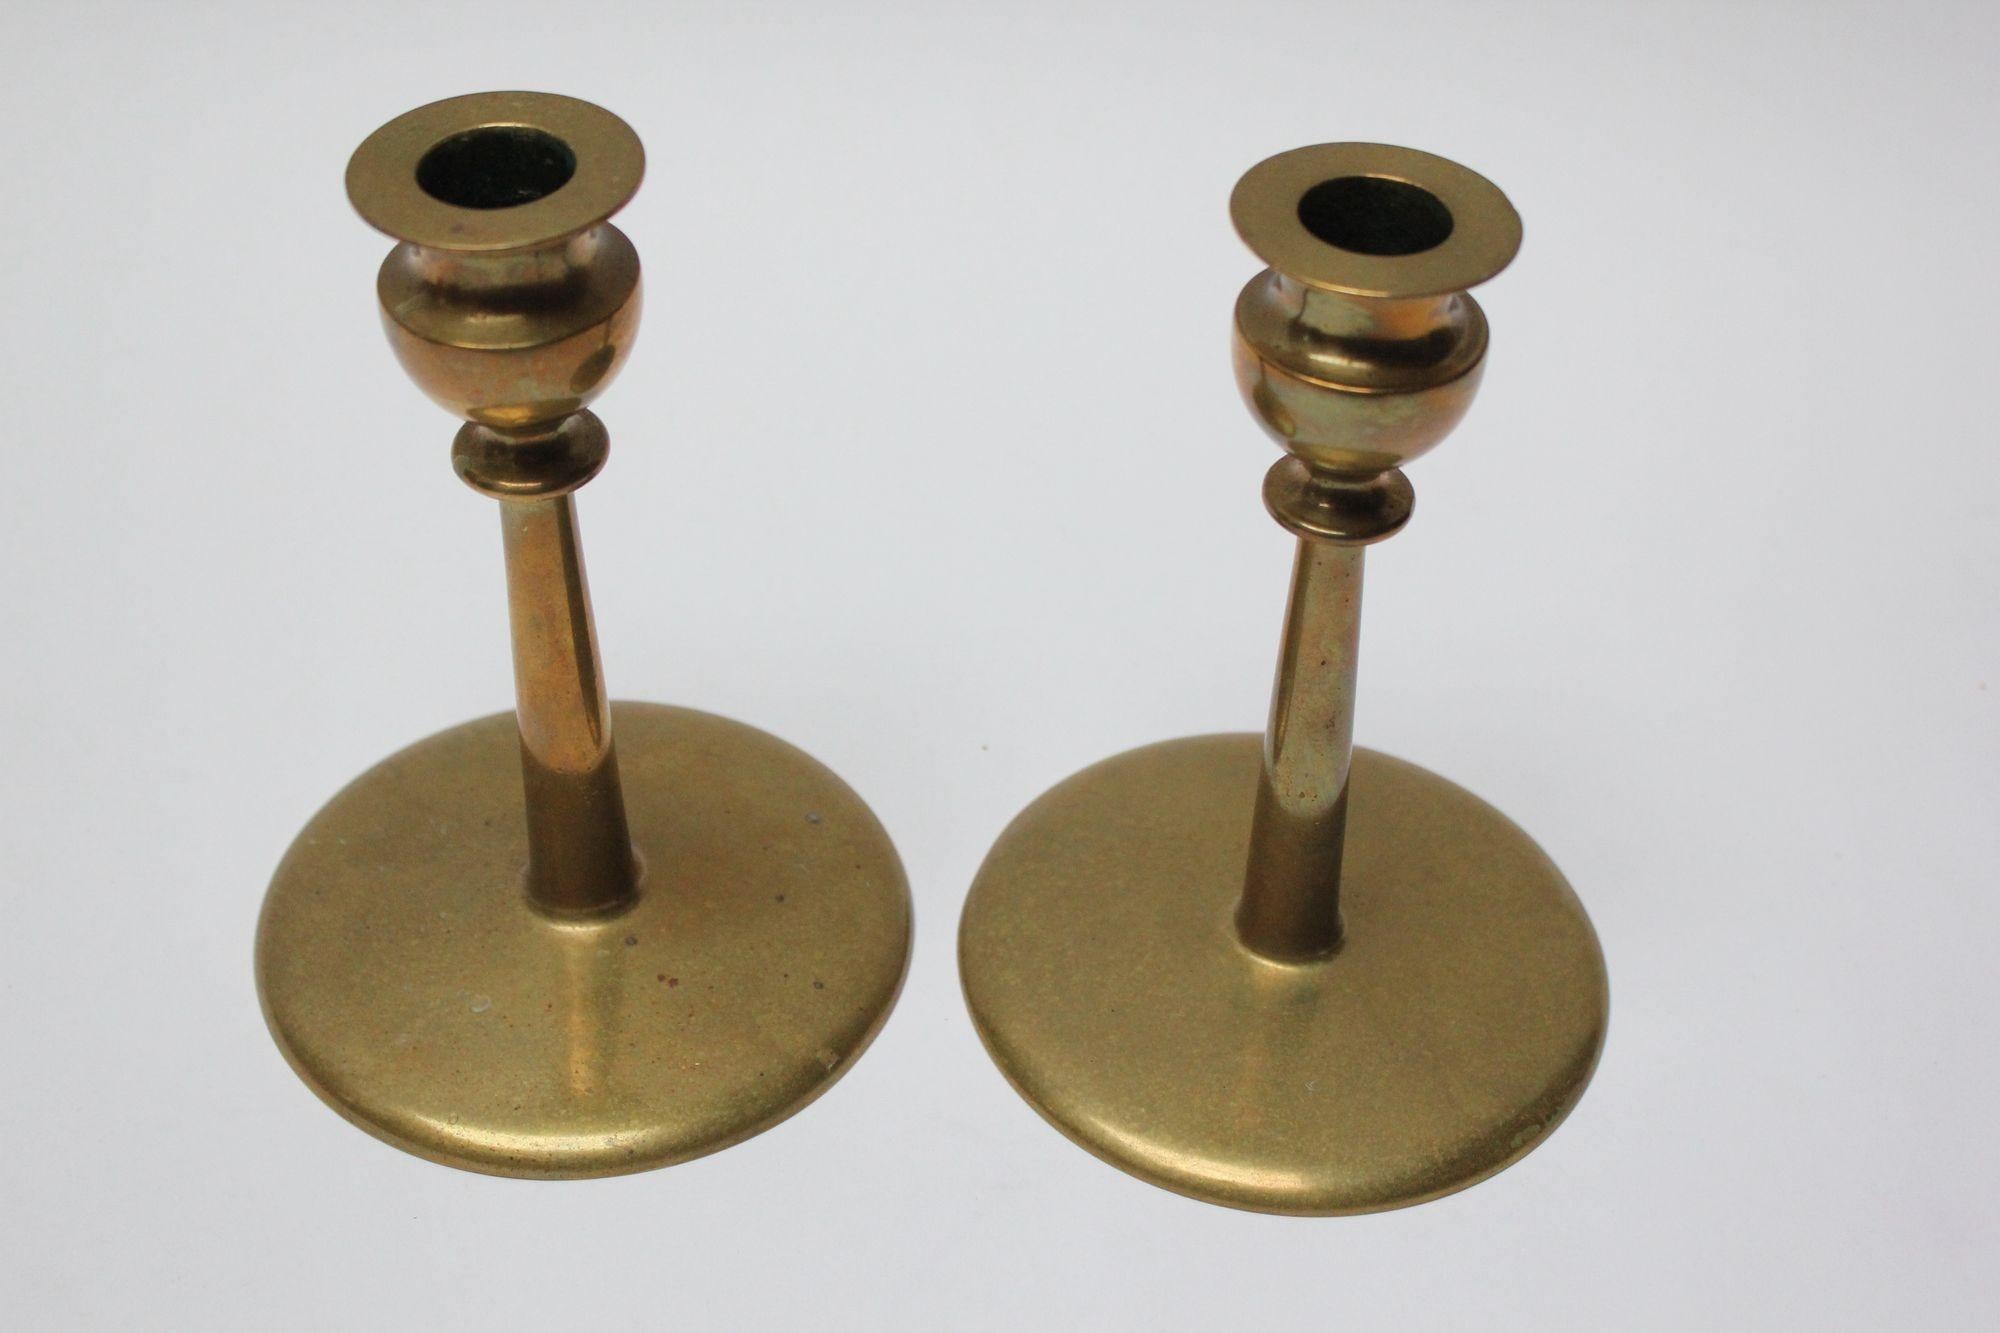 Mid-century brass turned candlesticks, each with bulbous bobeche and cylindrical stem on circular, disk base.
Beautifully aged, showing natural patina, a few scuffs/tarnish spots (unpolished).
Measures: Height 6.25